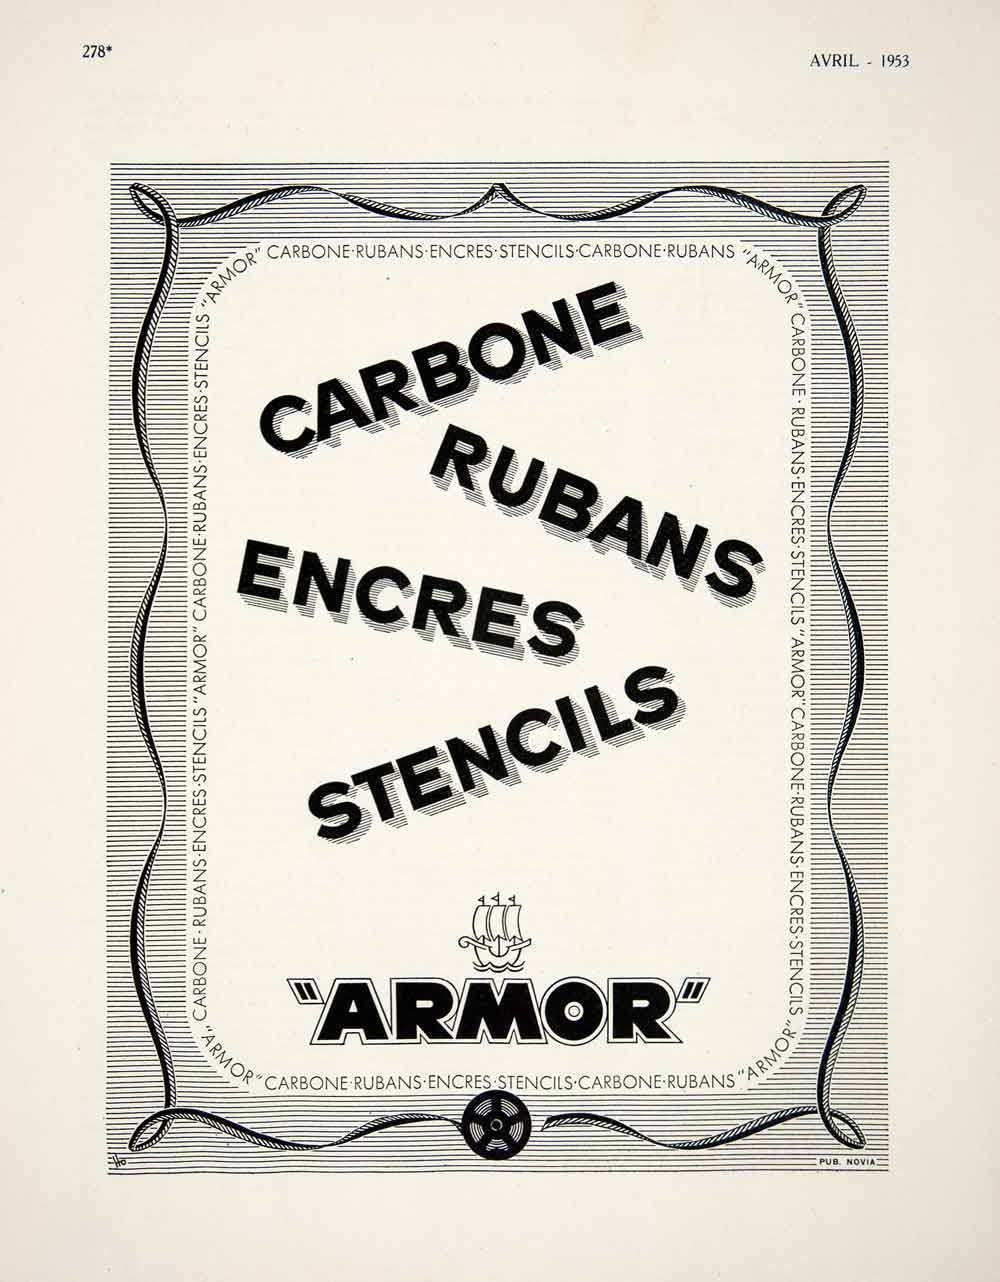 1953 Ad Armor Carbon Paper Ink Stencils French Stationary Office Supplies VEN8